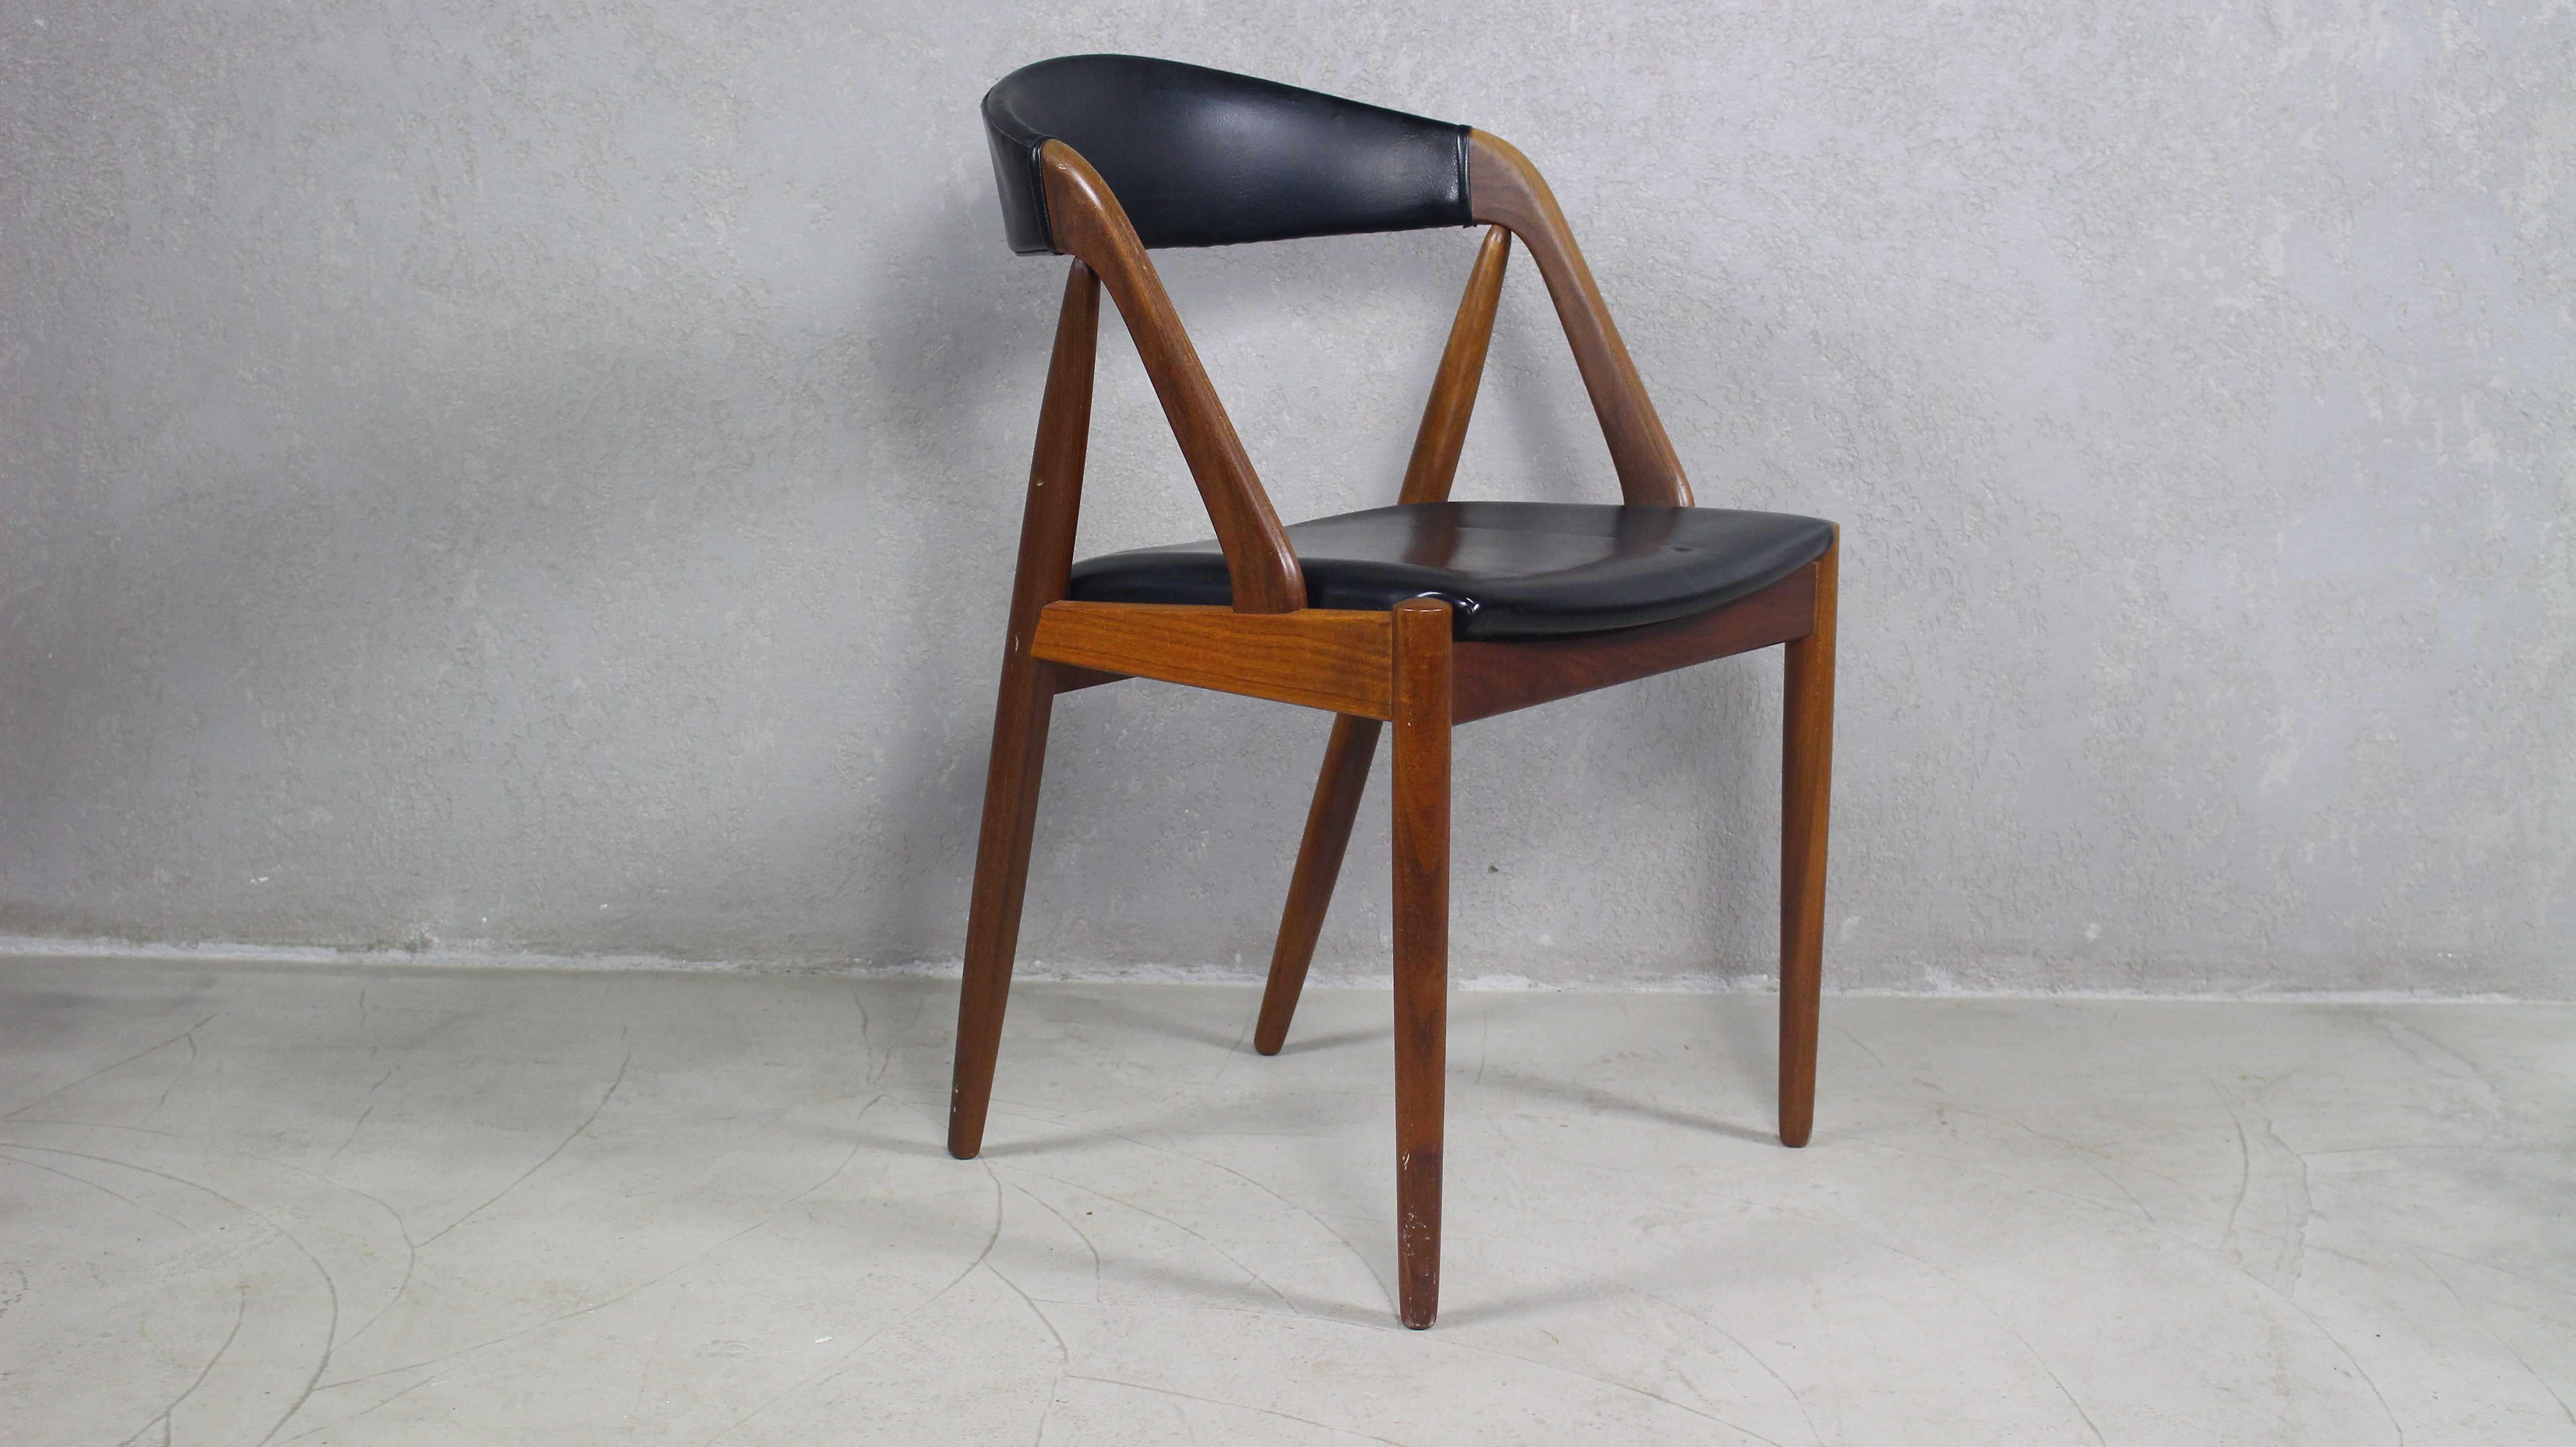 Truly elegant original 1960s vintage Kai Kristiansen Model #31 accent chair in excellent condition.
 This is an early, sought after vintage model, with high quality teak wood and a more elegant frame and design than the later ones.
The teak shines